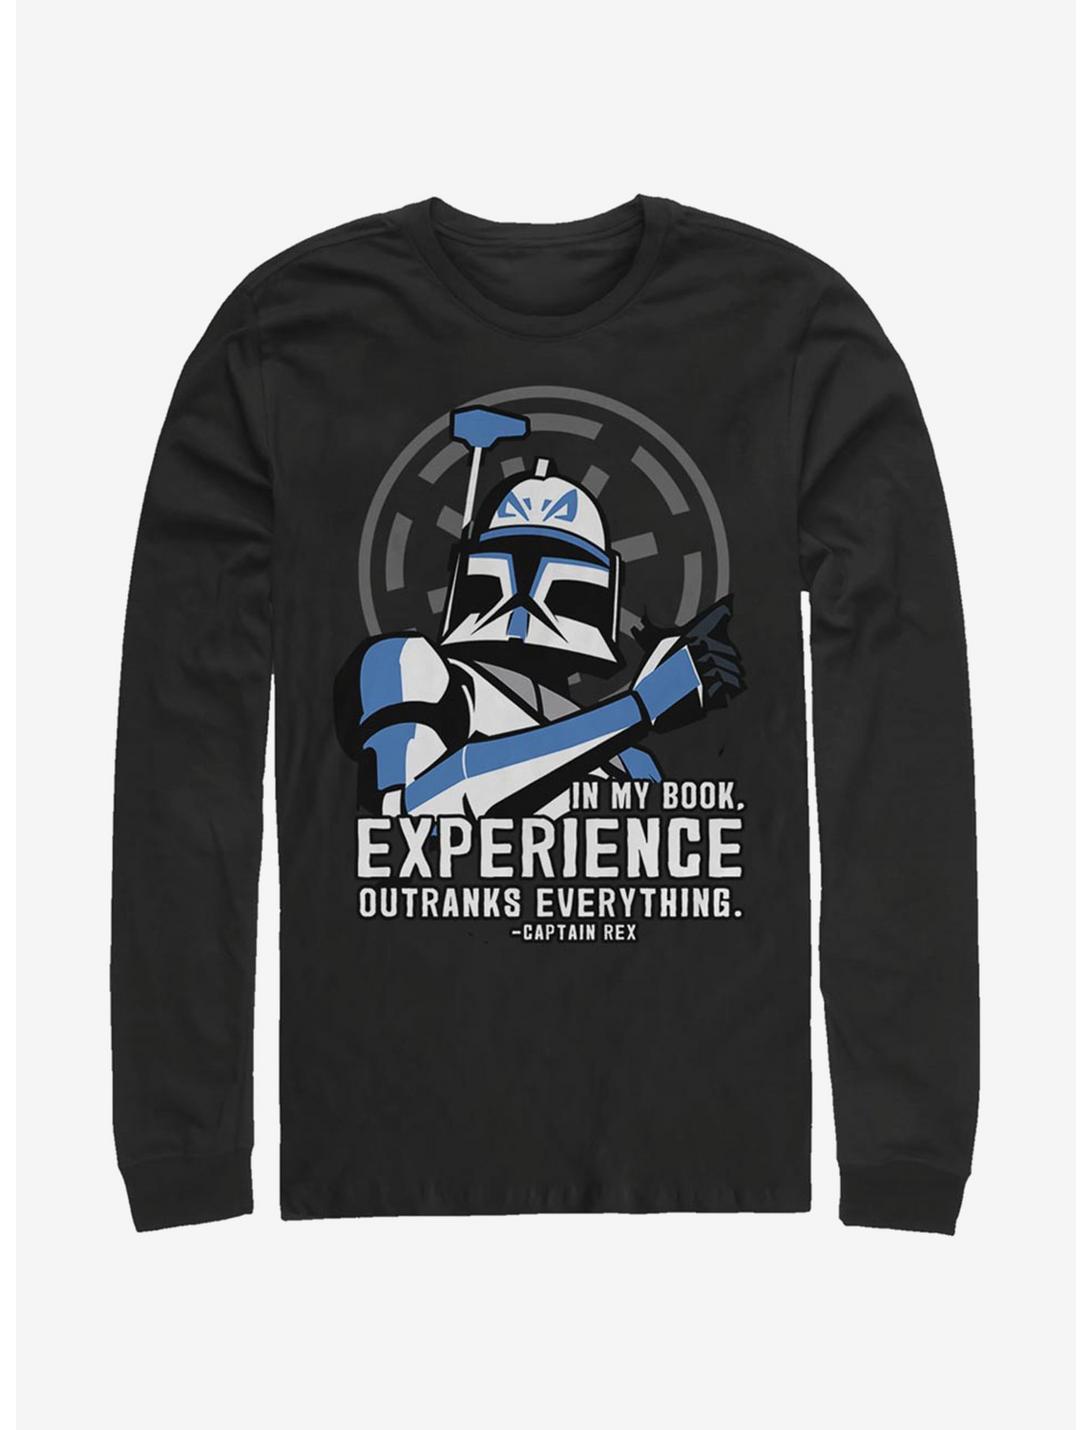 Star Wars: The Clone Wars Outranks Everything Long-Sleeve T-Shirt, BLACK, hi-res